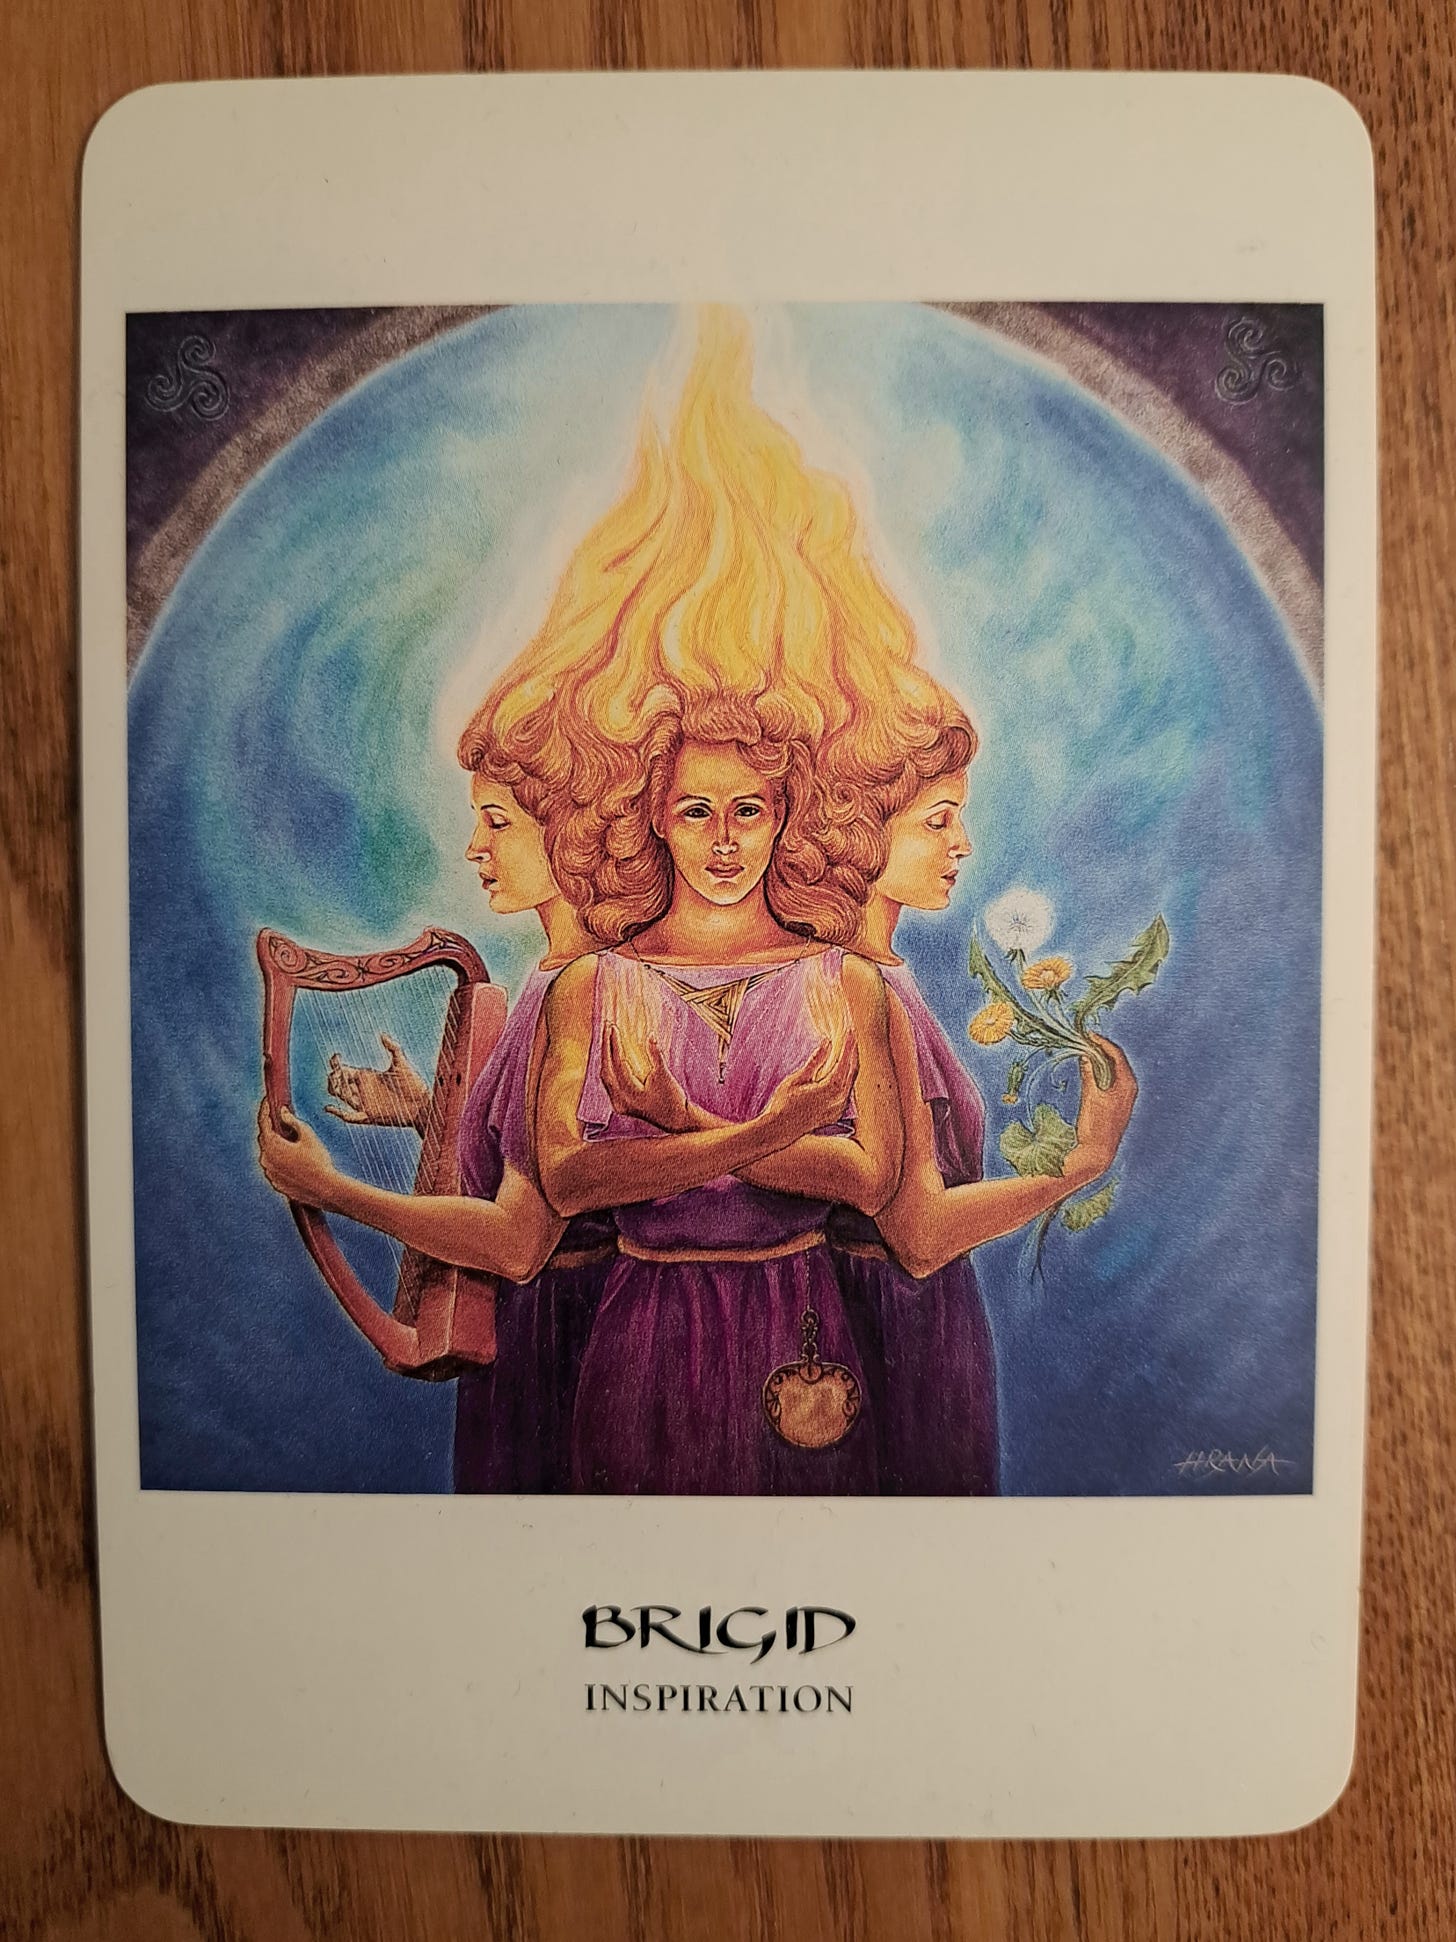 Brigid oracle card showing 3 fiery-haired goddesses holding a harp, fire, and flowers